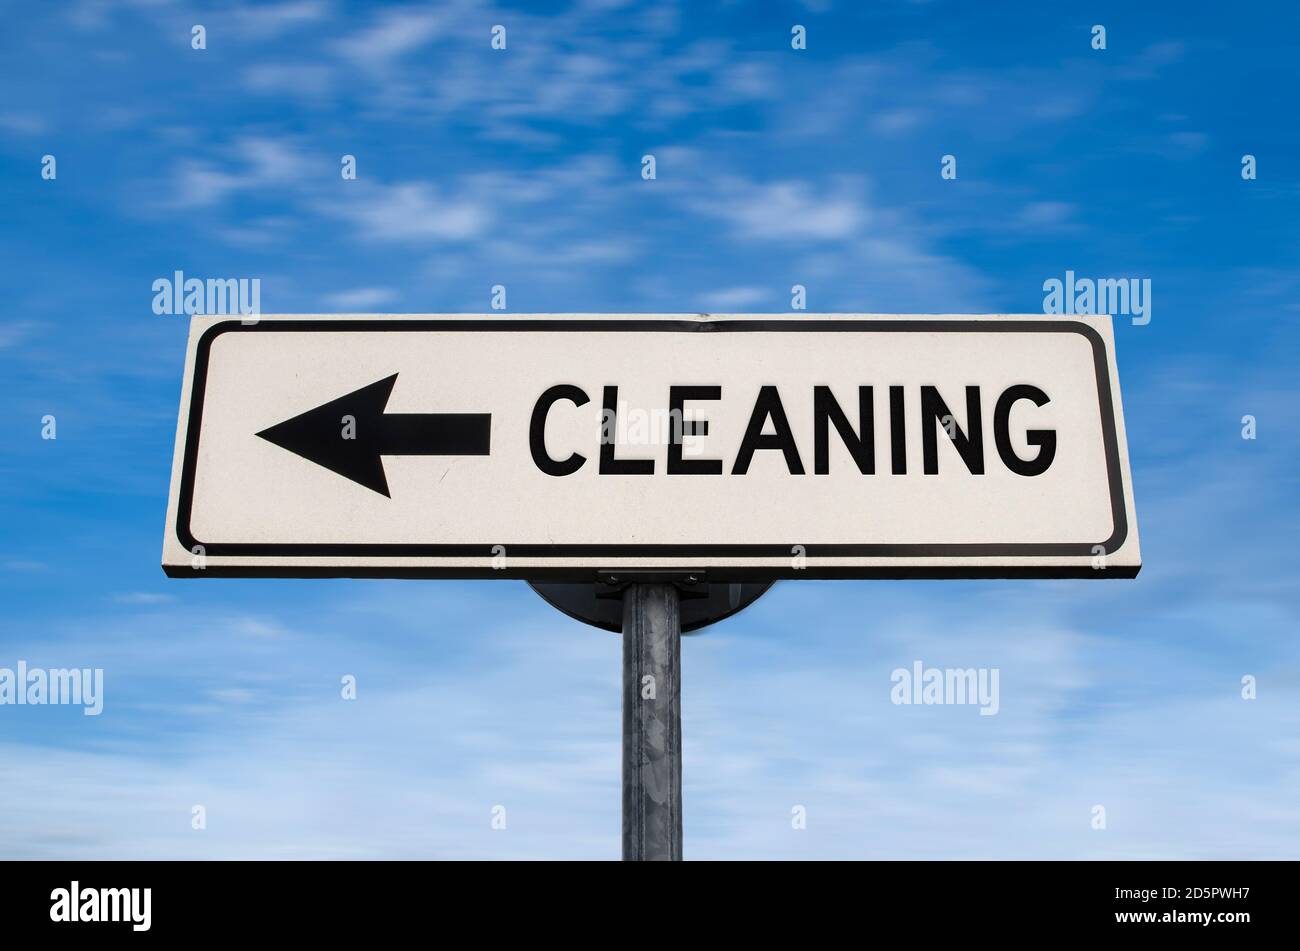 Cleaning road sign, arrow on blue sky background. One way blank road sign with copy space. Arrow on a pole pointing in one direction. Stock Photo